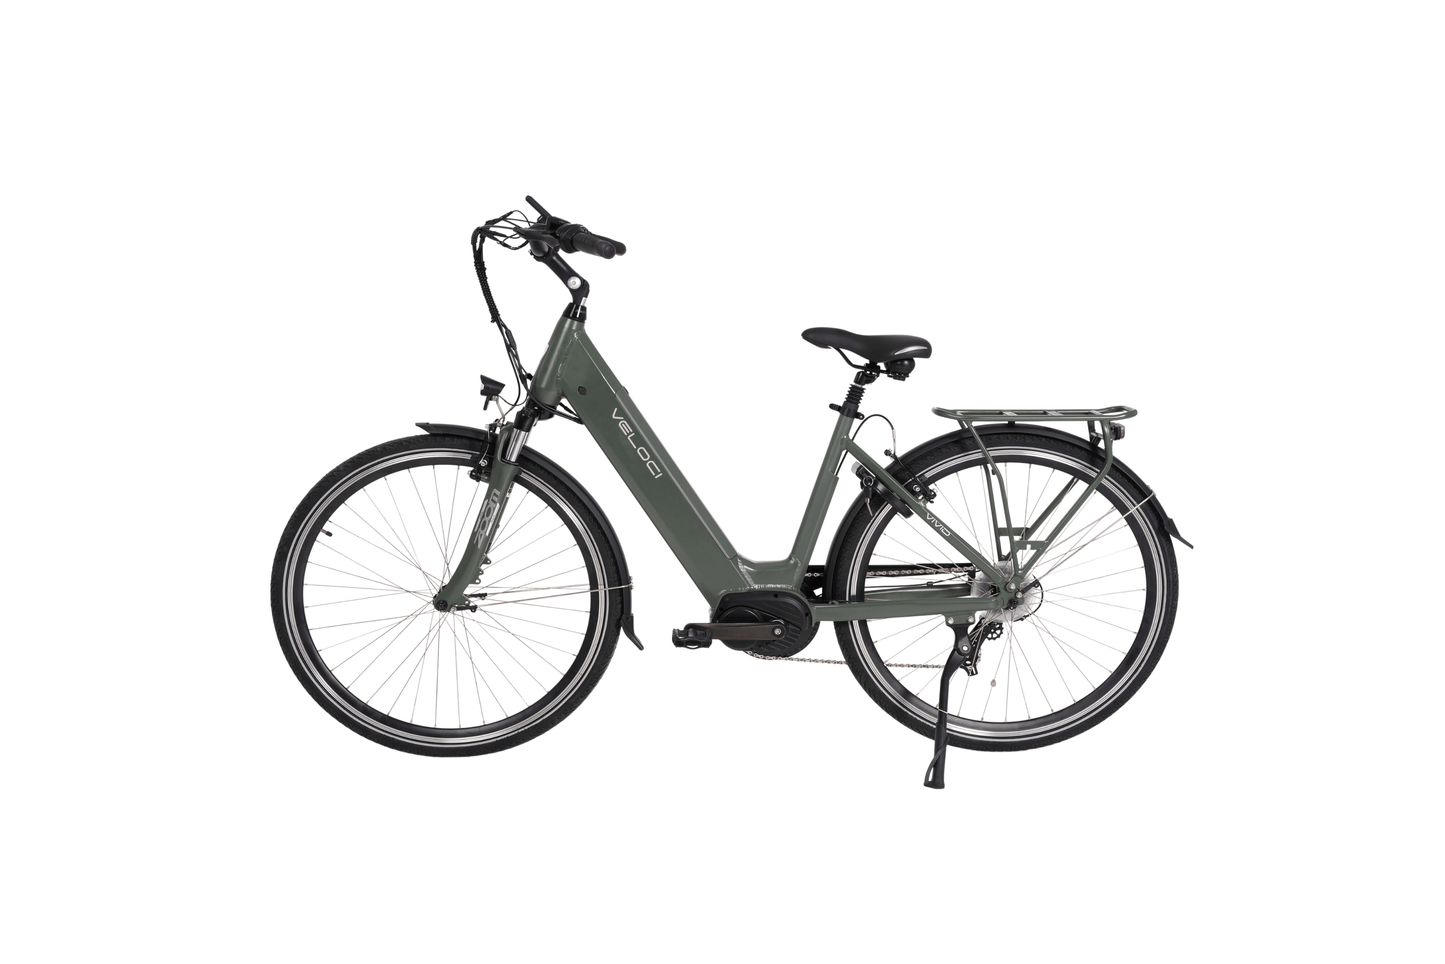 Veloci Vivid electric bike available for sale. E-bike with integrated downtube battery in frame. Veloci e-bike in the colour "Crater Grey"